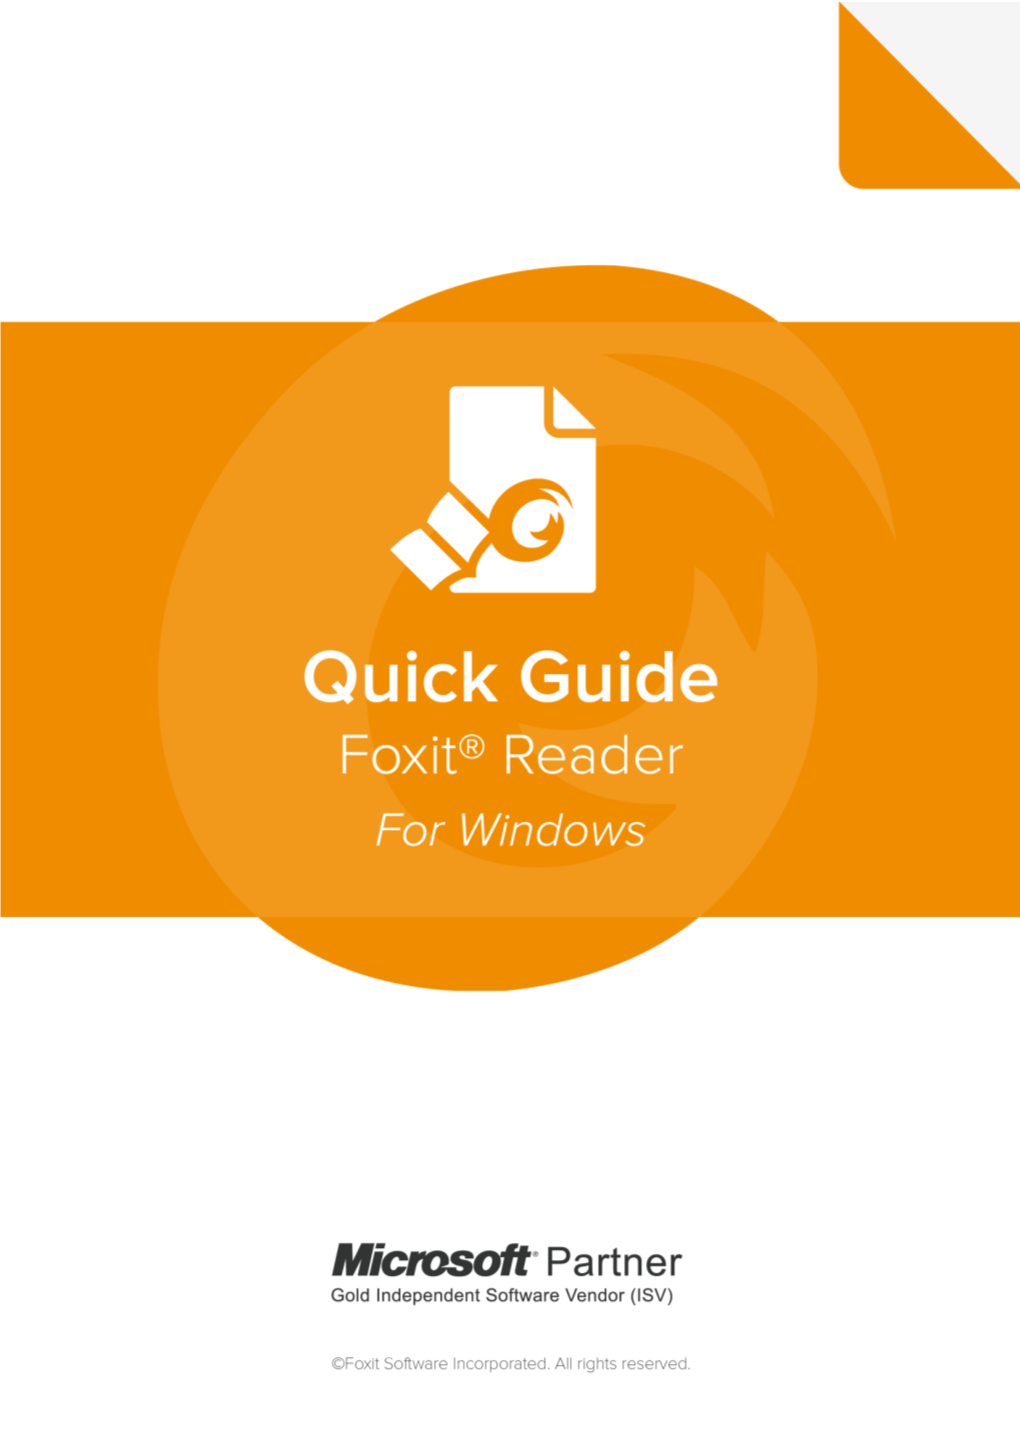 Foxit Reader 9.6 Quick Guide